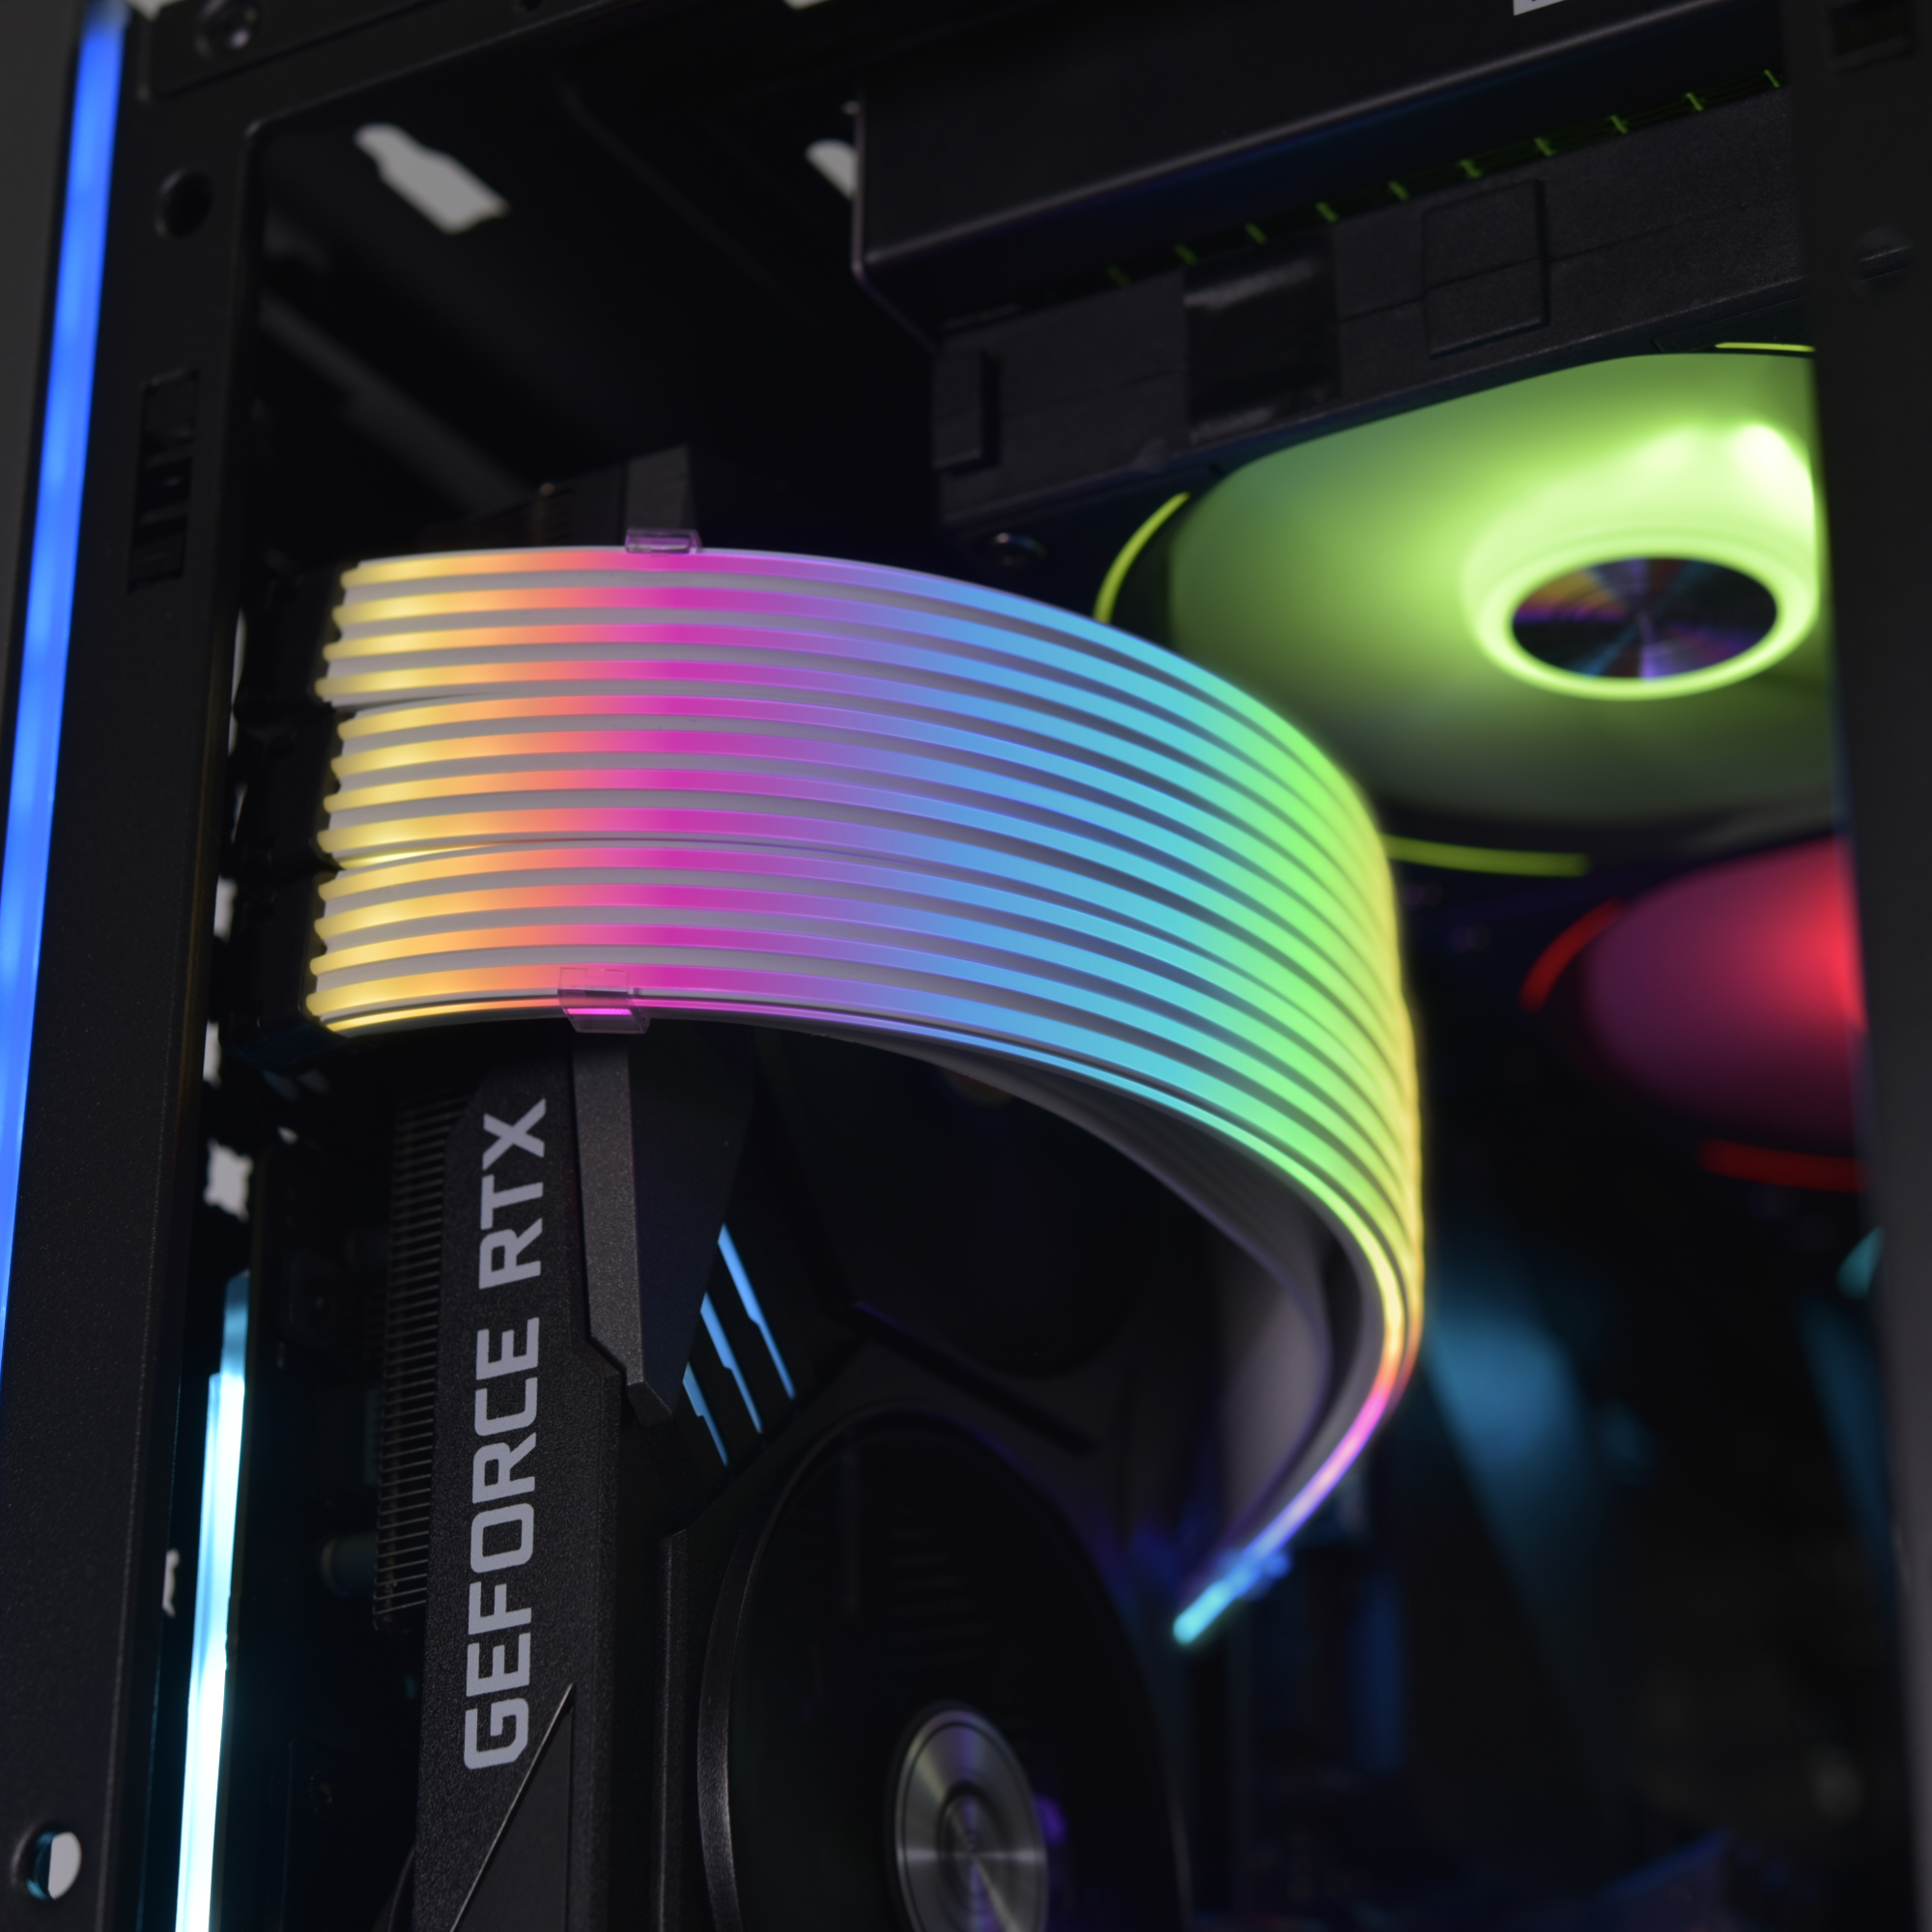 Lian Li's new Strimer Plus V2 RGB extension cables are built to